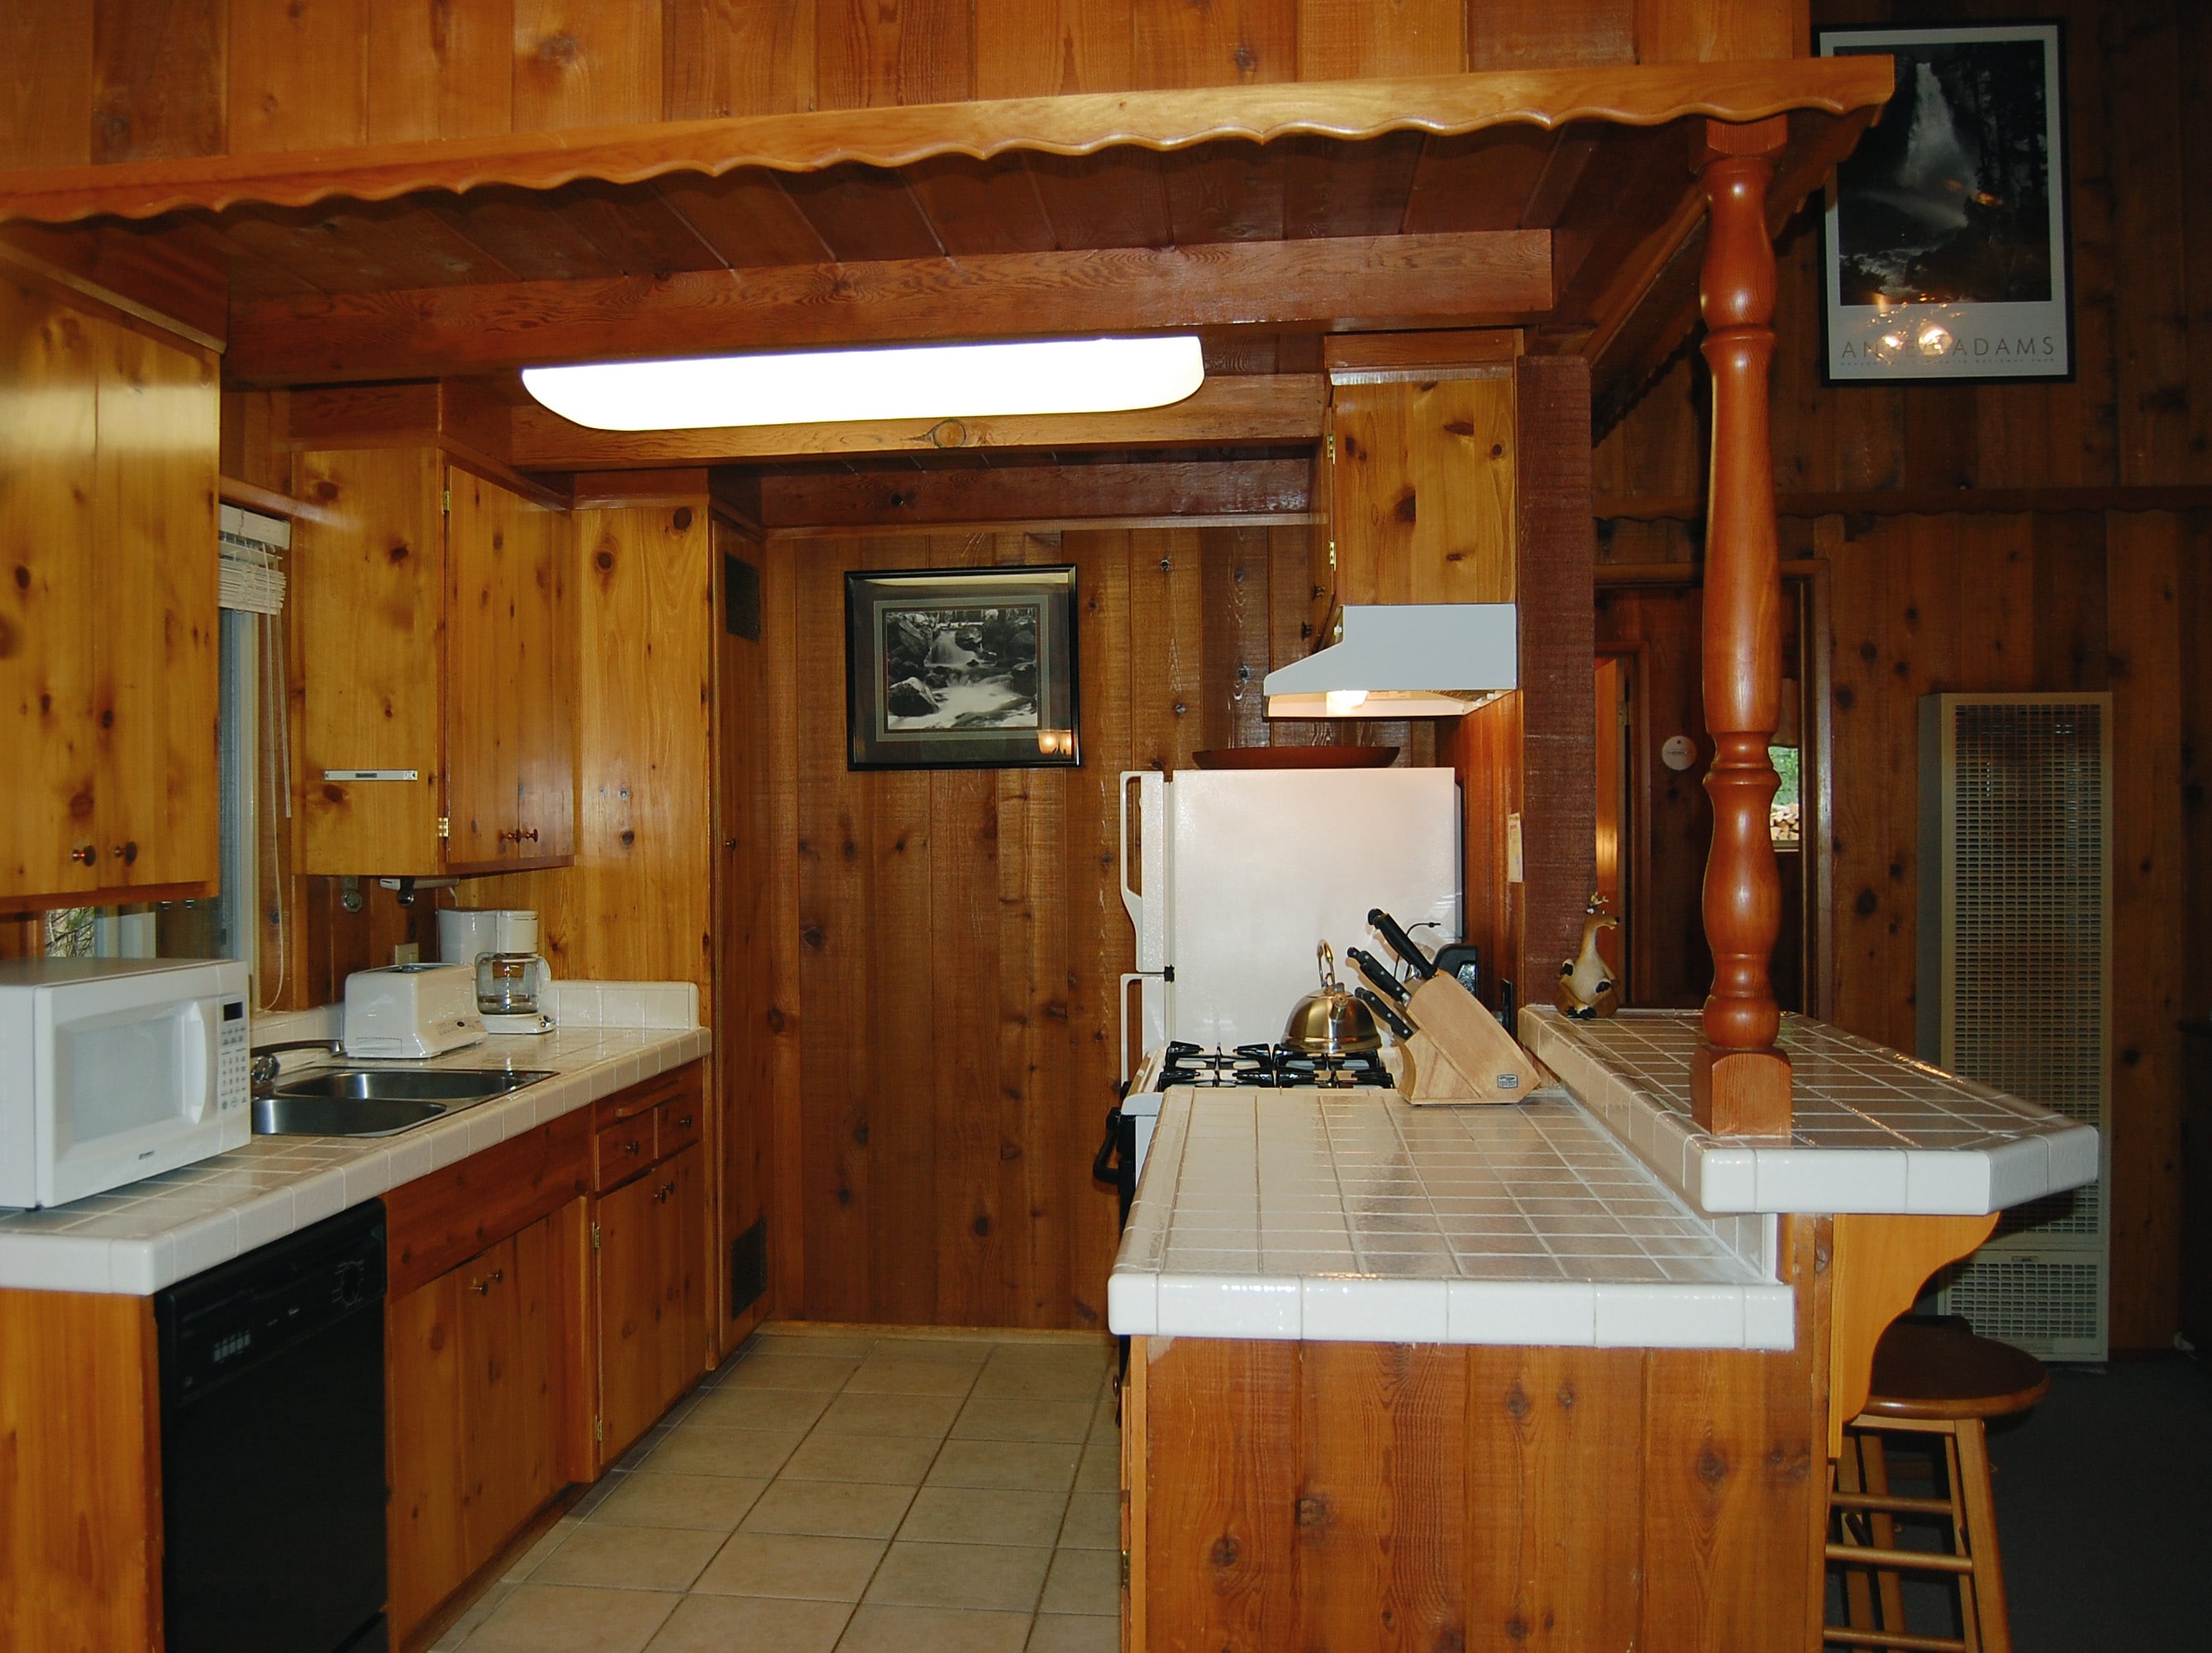 Kitchen with additional seating at bar for 2